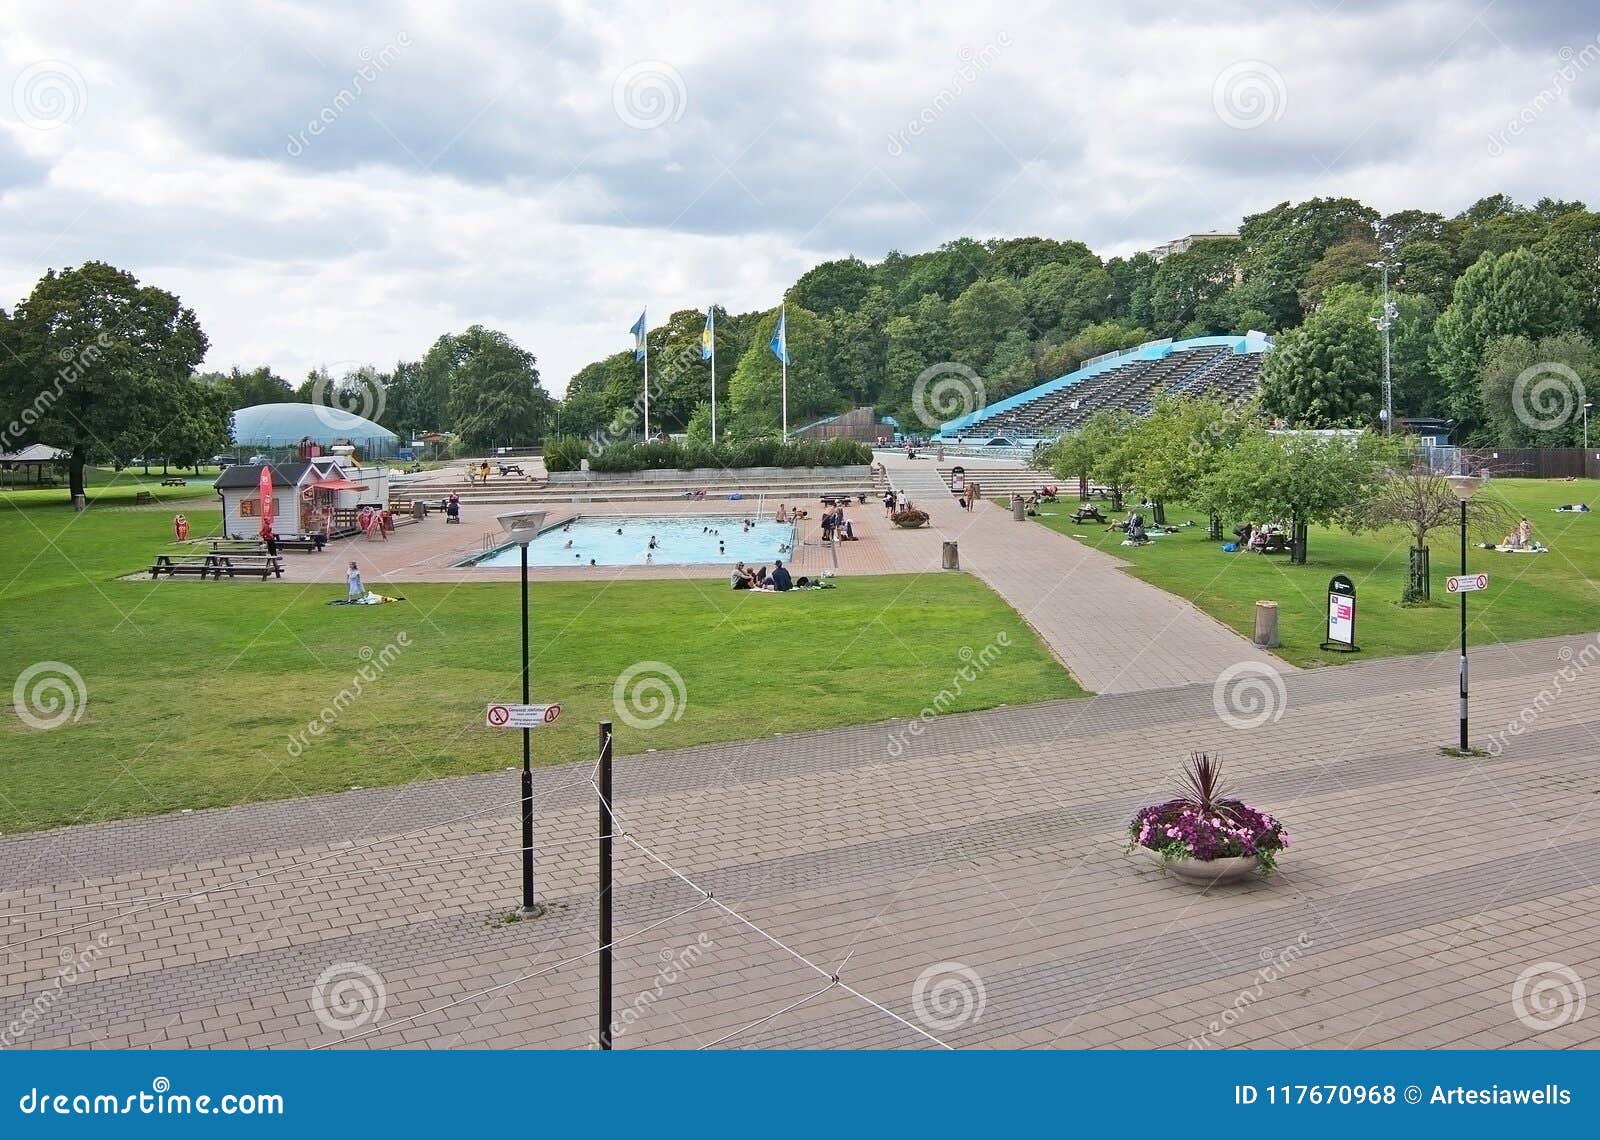 Eriksdalsbadet Sports Center Editorial Stock Photo - Image of modern, blue:  117670968